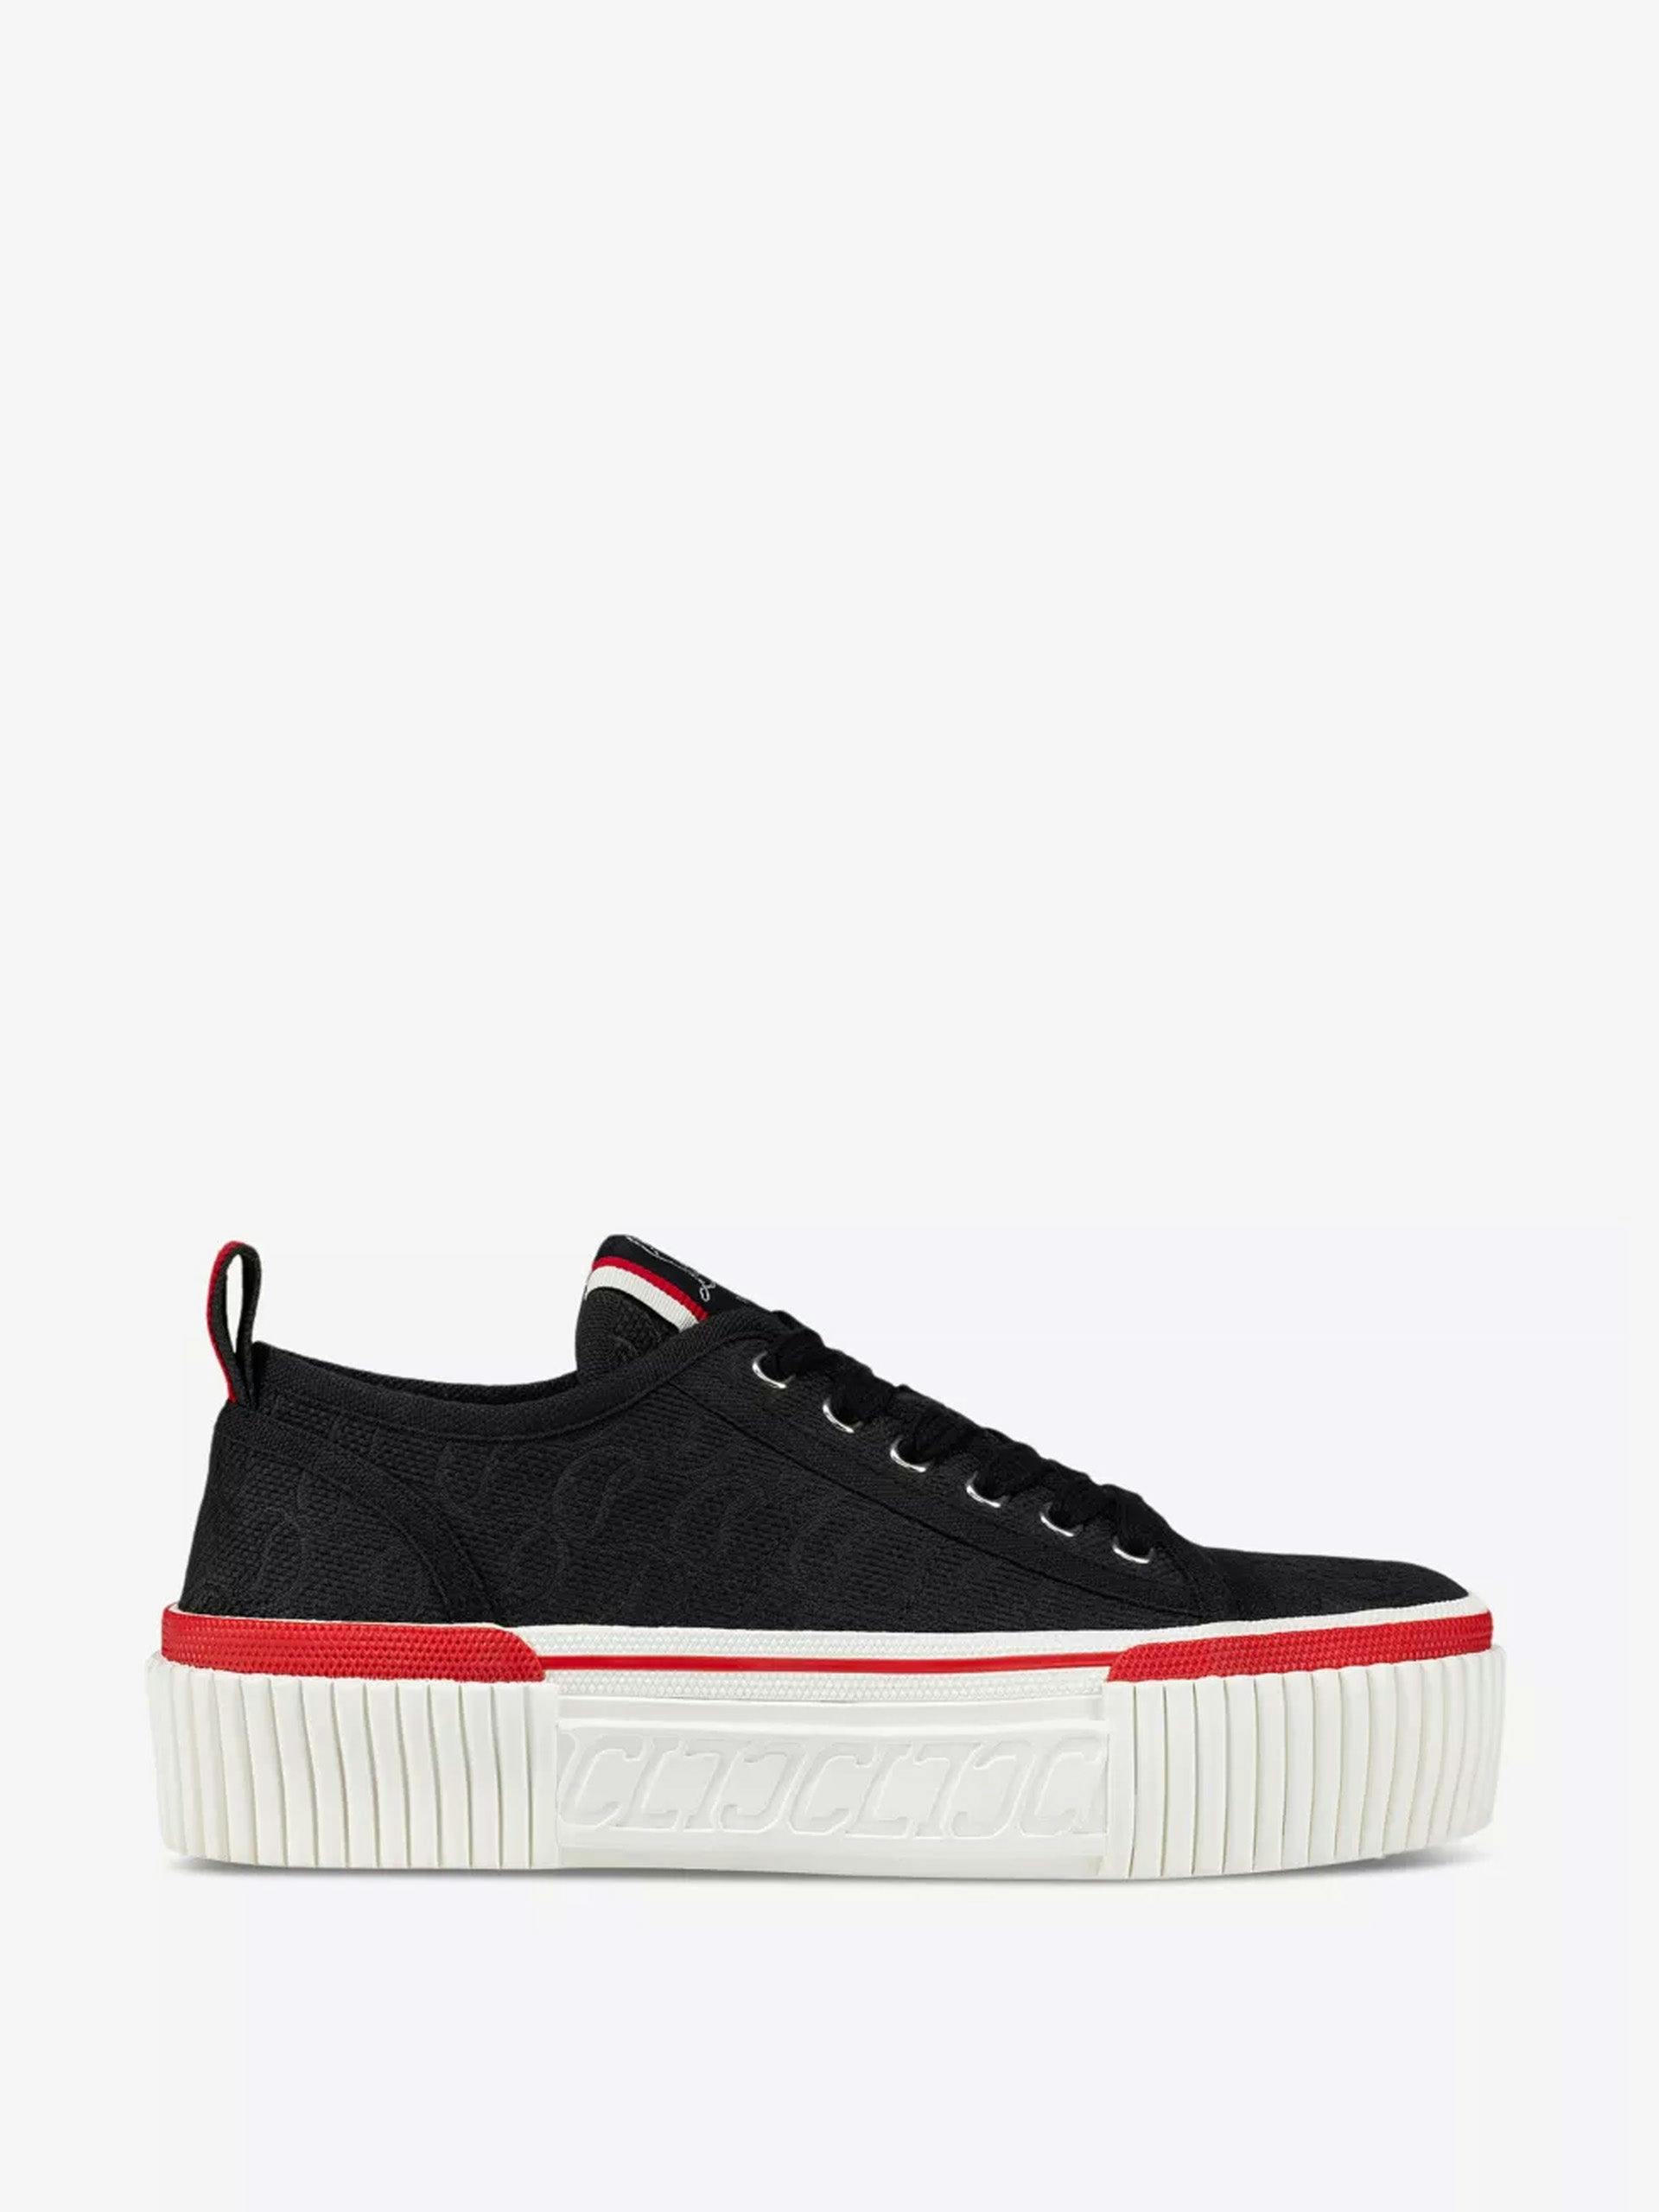 Super Pedro brand-embellished woven low-top trainers